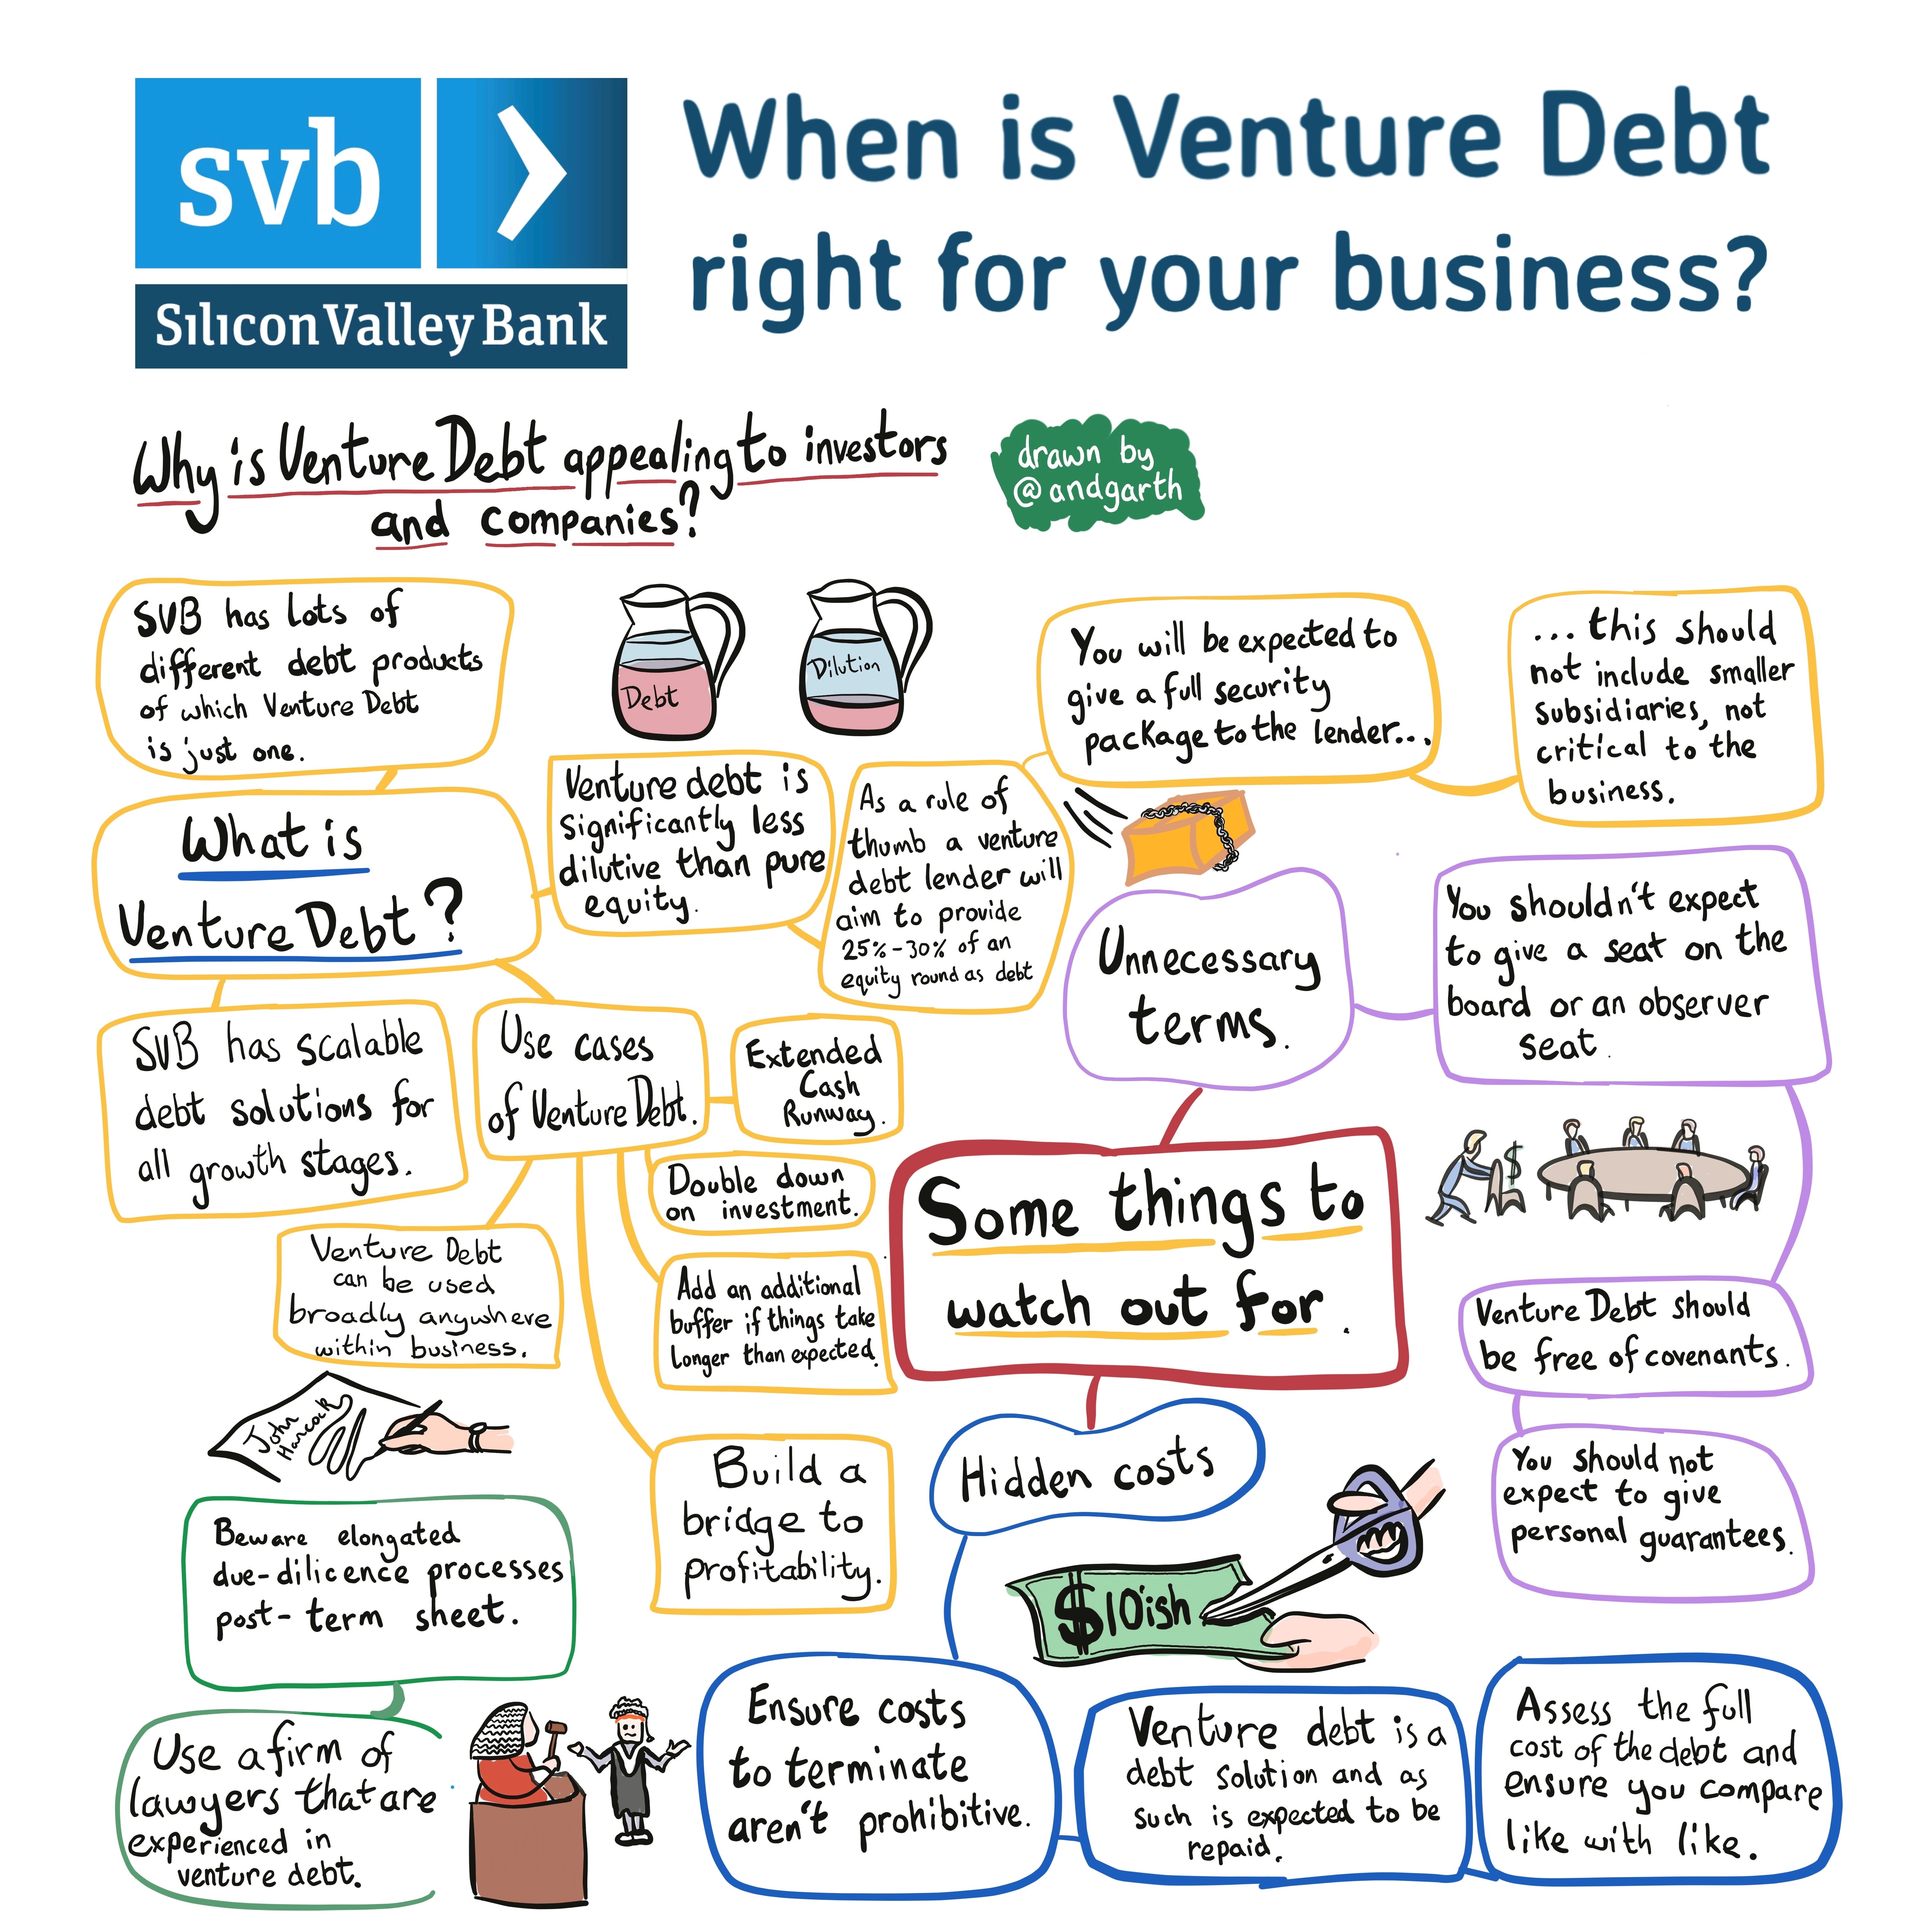 When does a company default on venture debt?